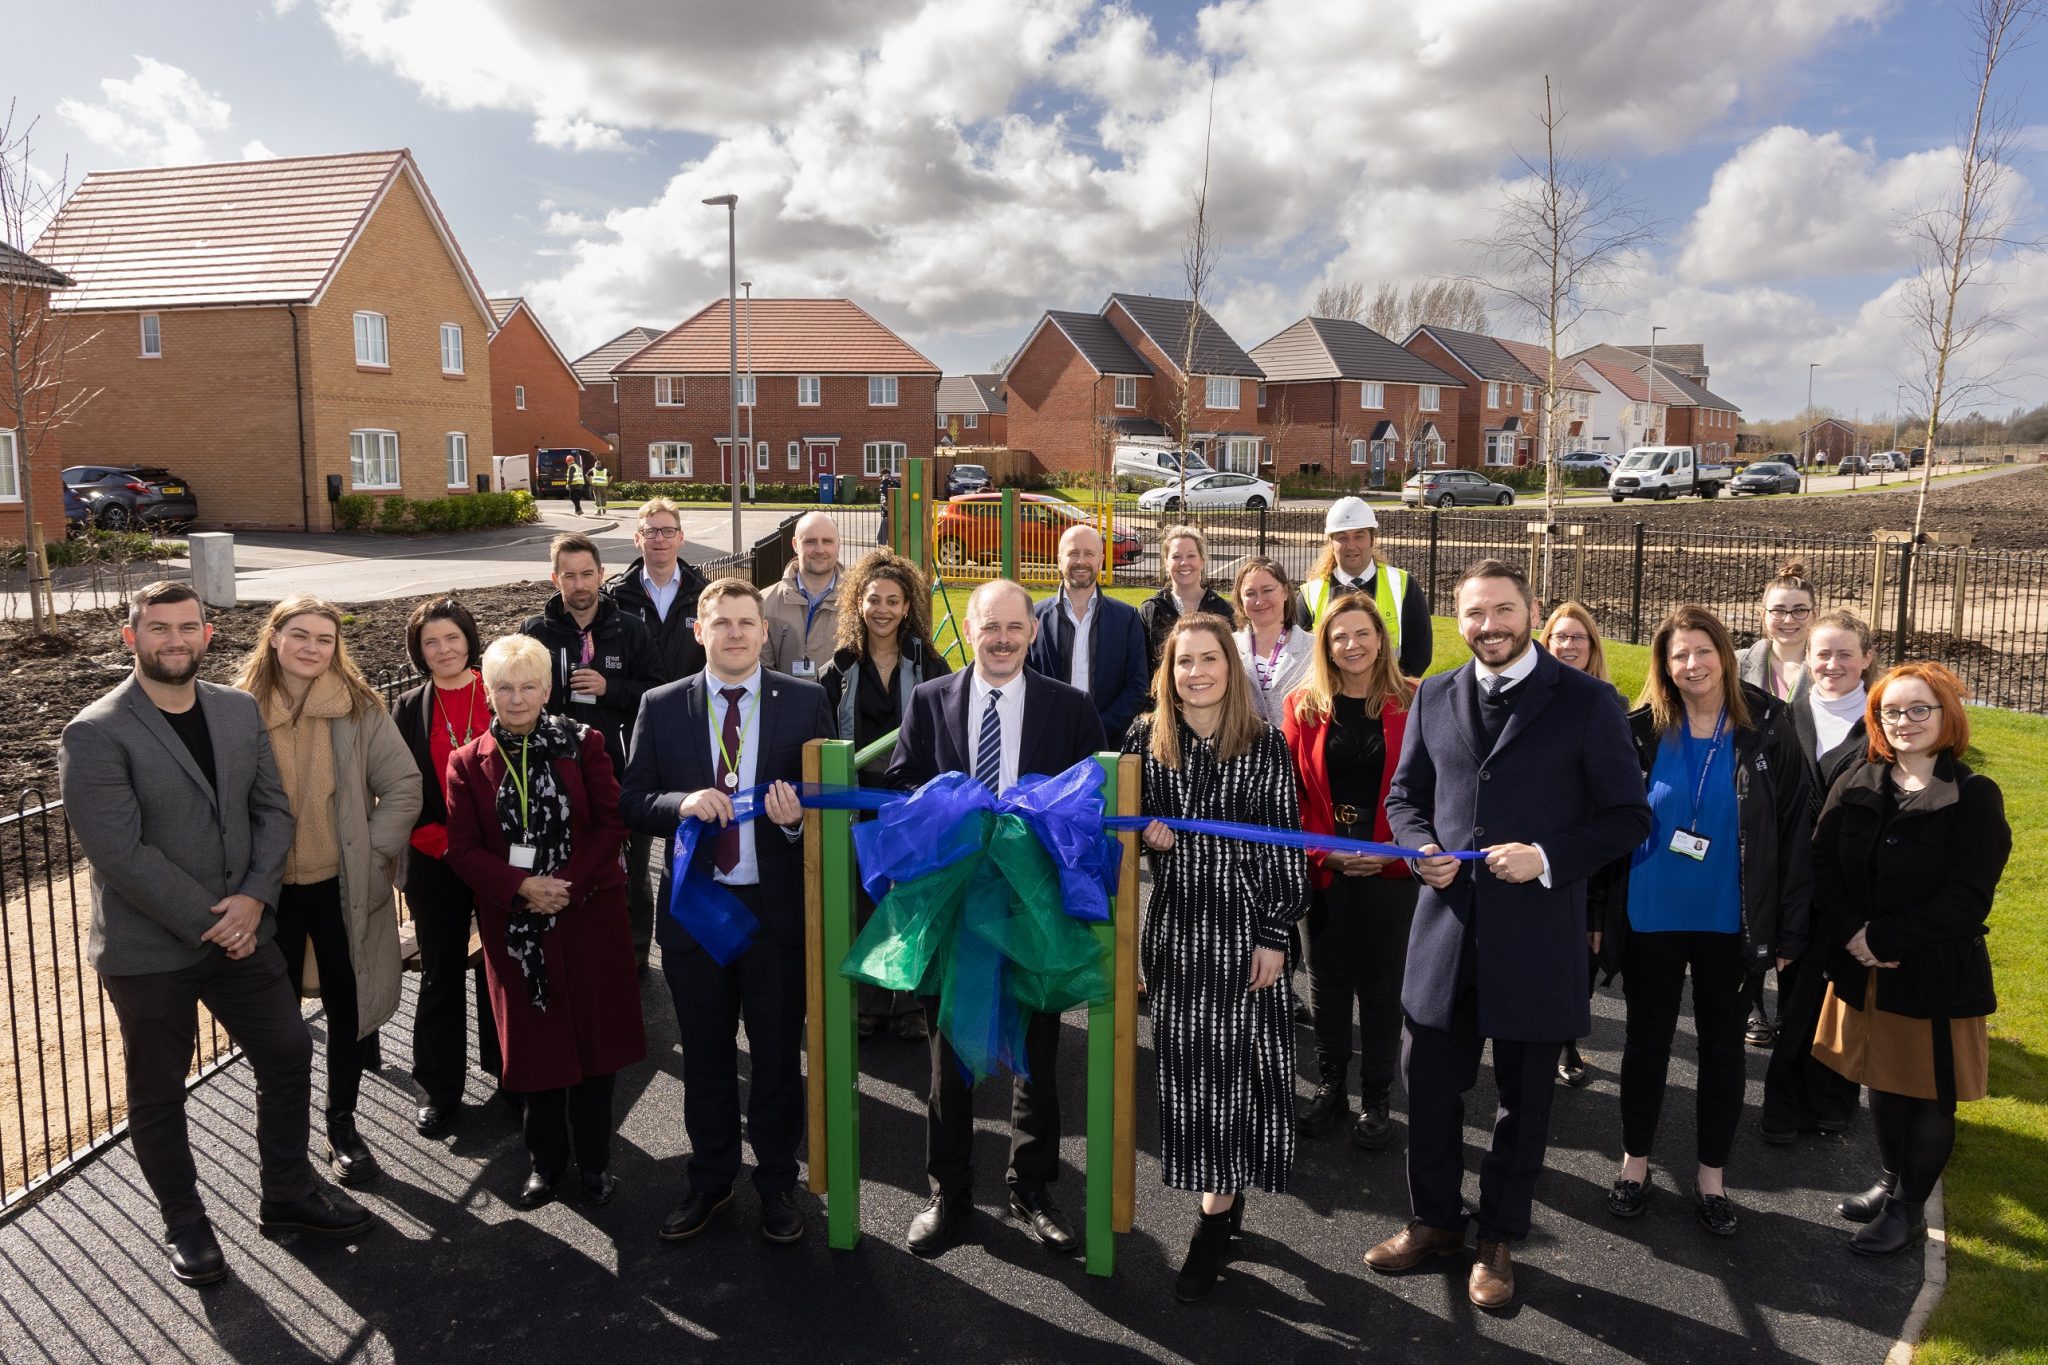 MP visits newly completed North Leigh Park development